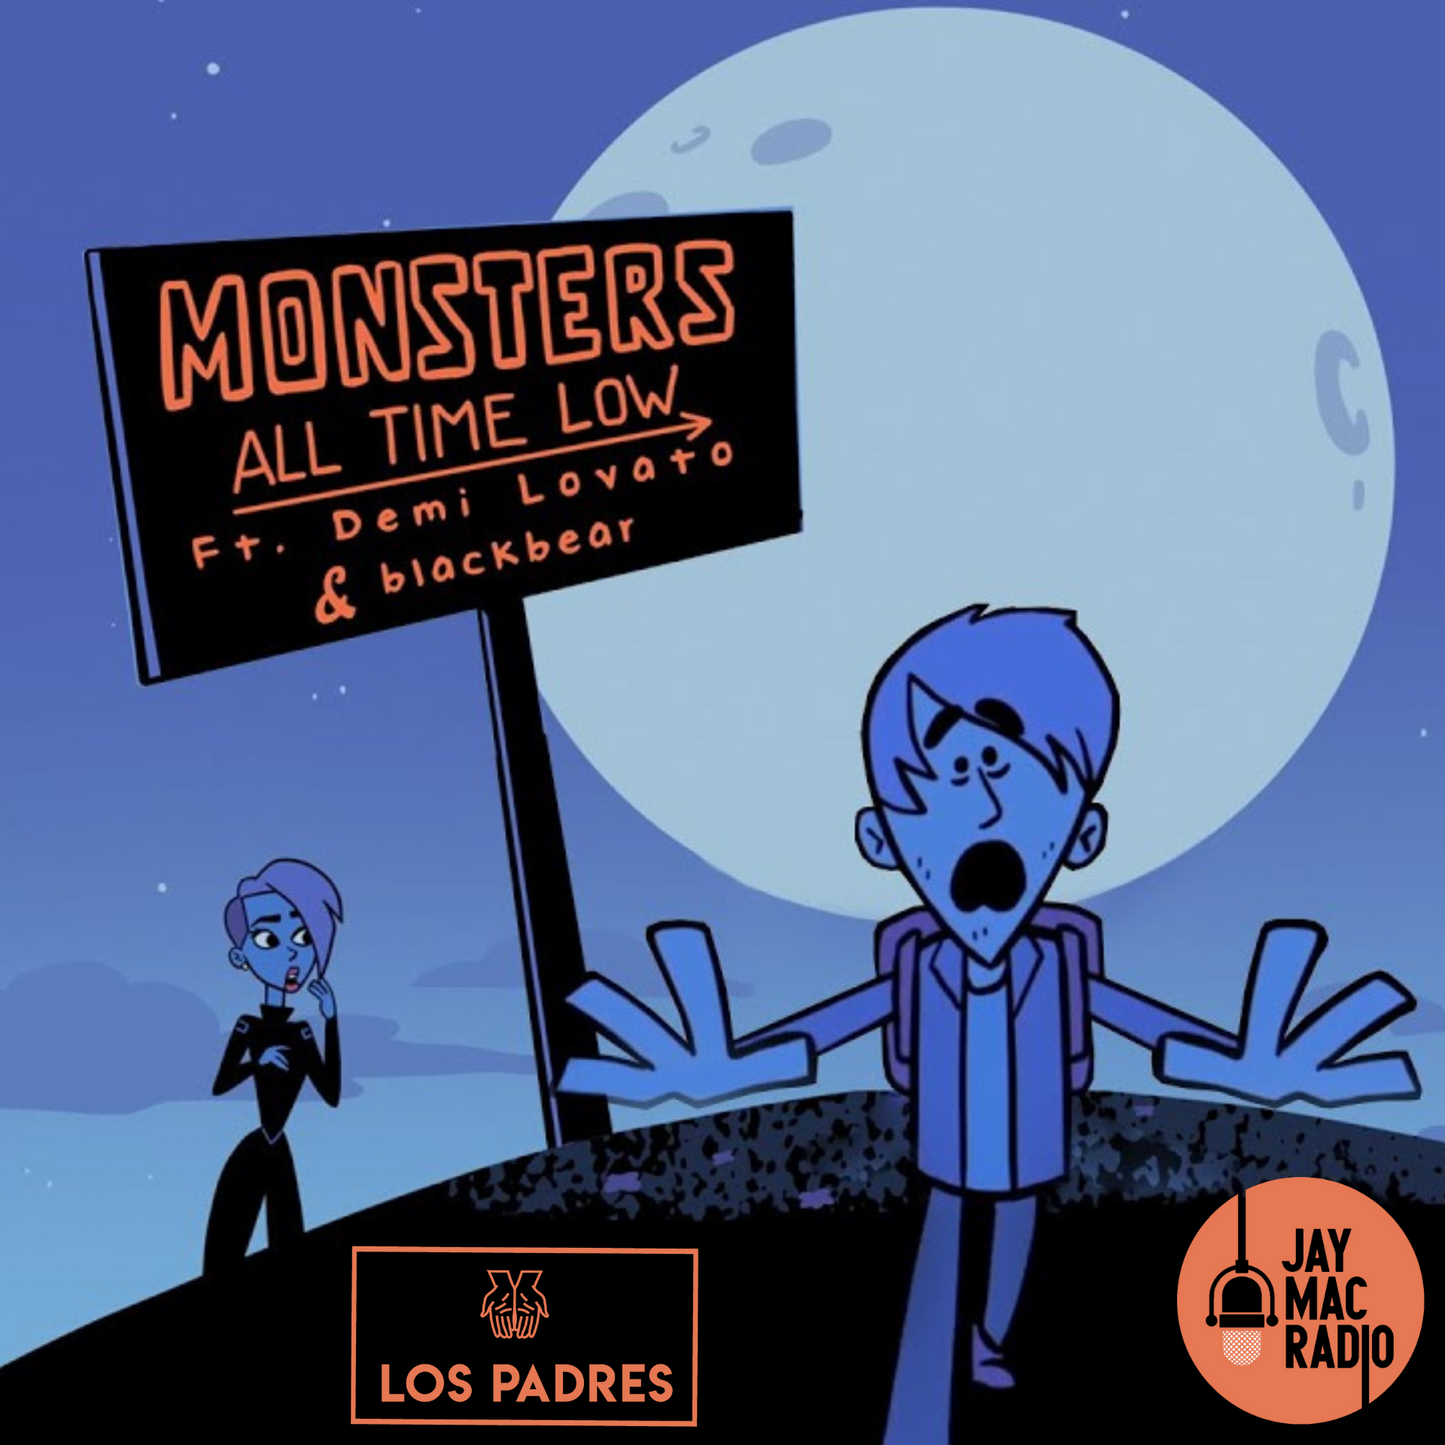 All Time Low - Monsters Ft. Demi Lovato And Blackbear (Los Padres & Jay Mac Remix)